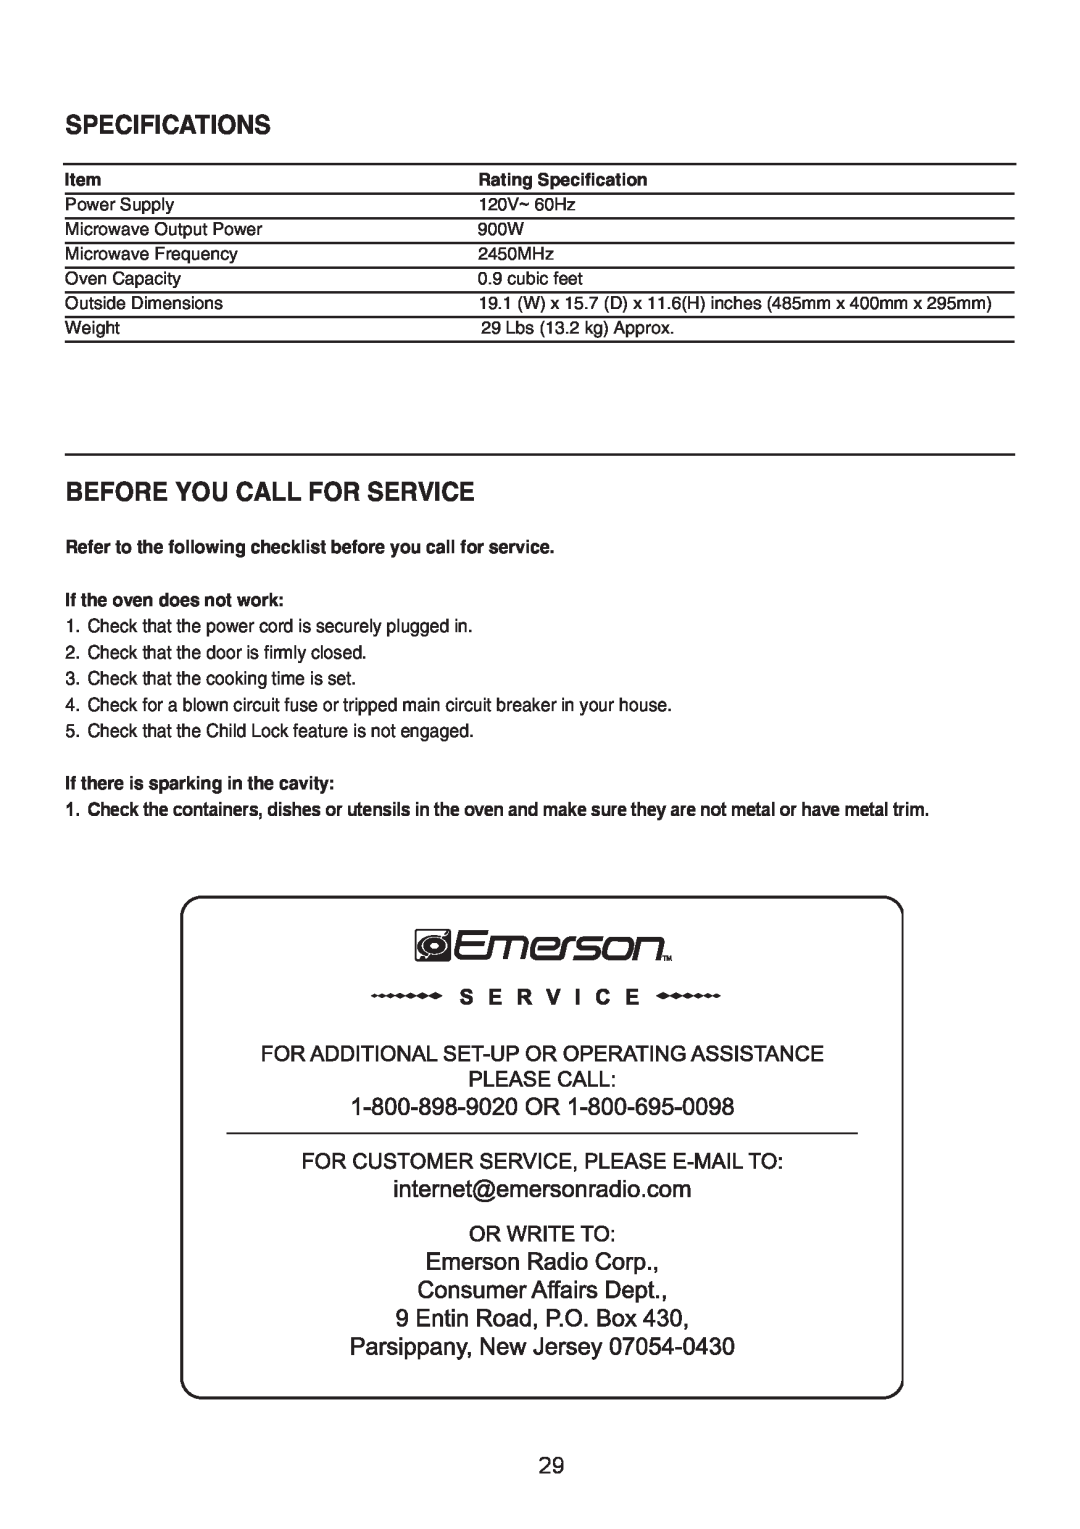 Emerson MW9325SL Specifications, Before You Call For Service, Refer to the following checklist before you call for service 